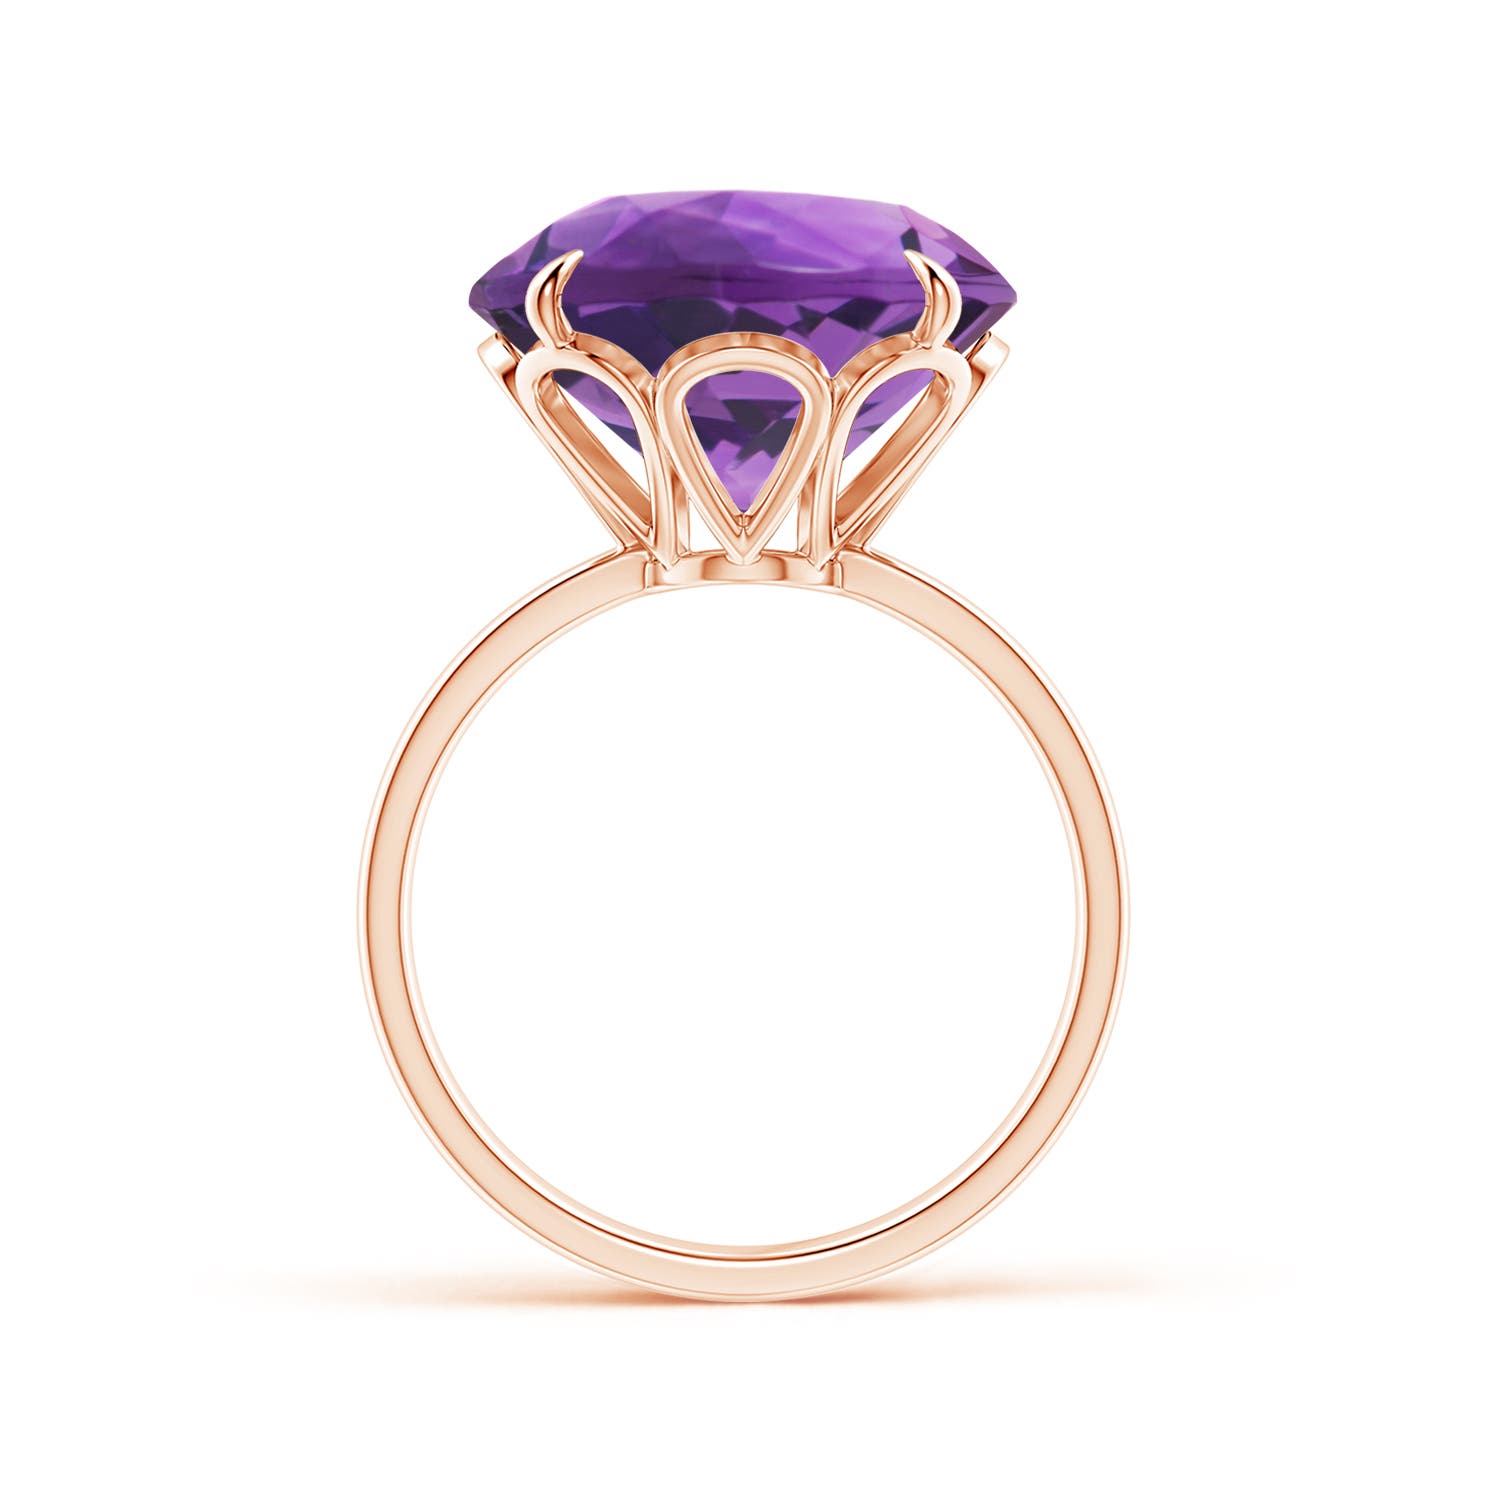 AAA- Amethyst / 8.5 CT / 14 KT Rose Gold